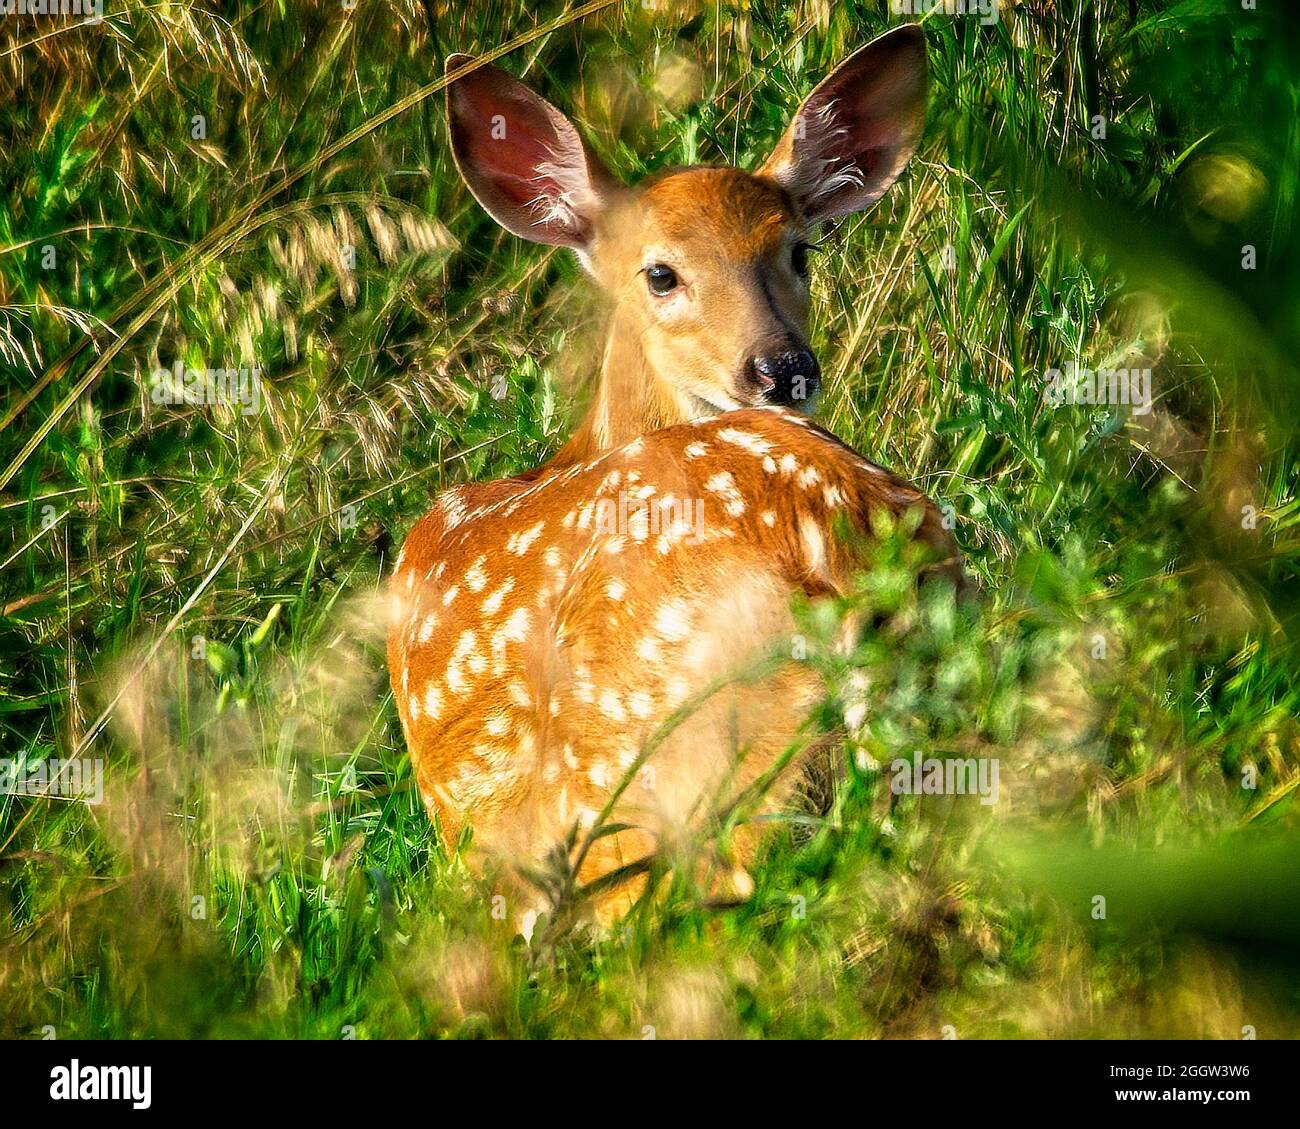 Whitetail deer fawn Stock Photo